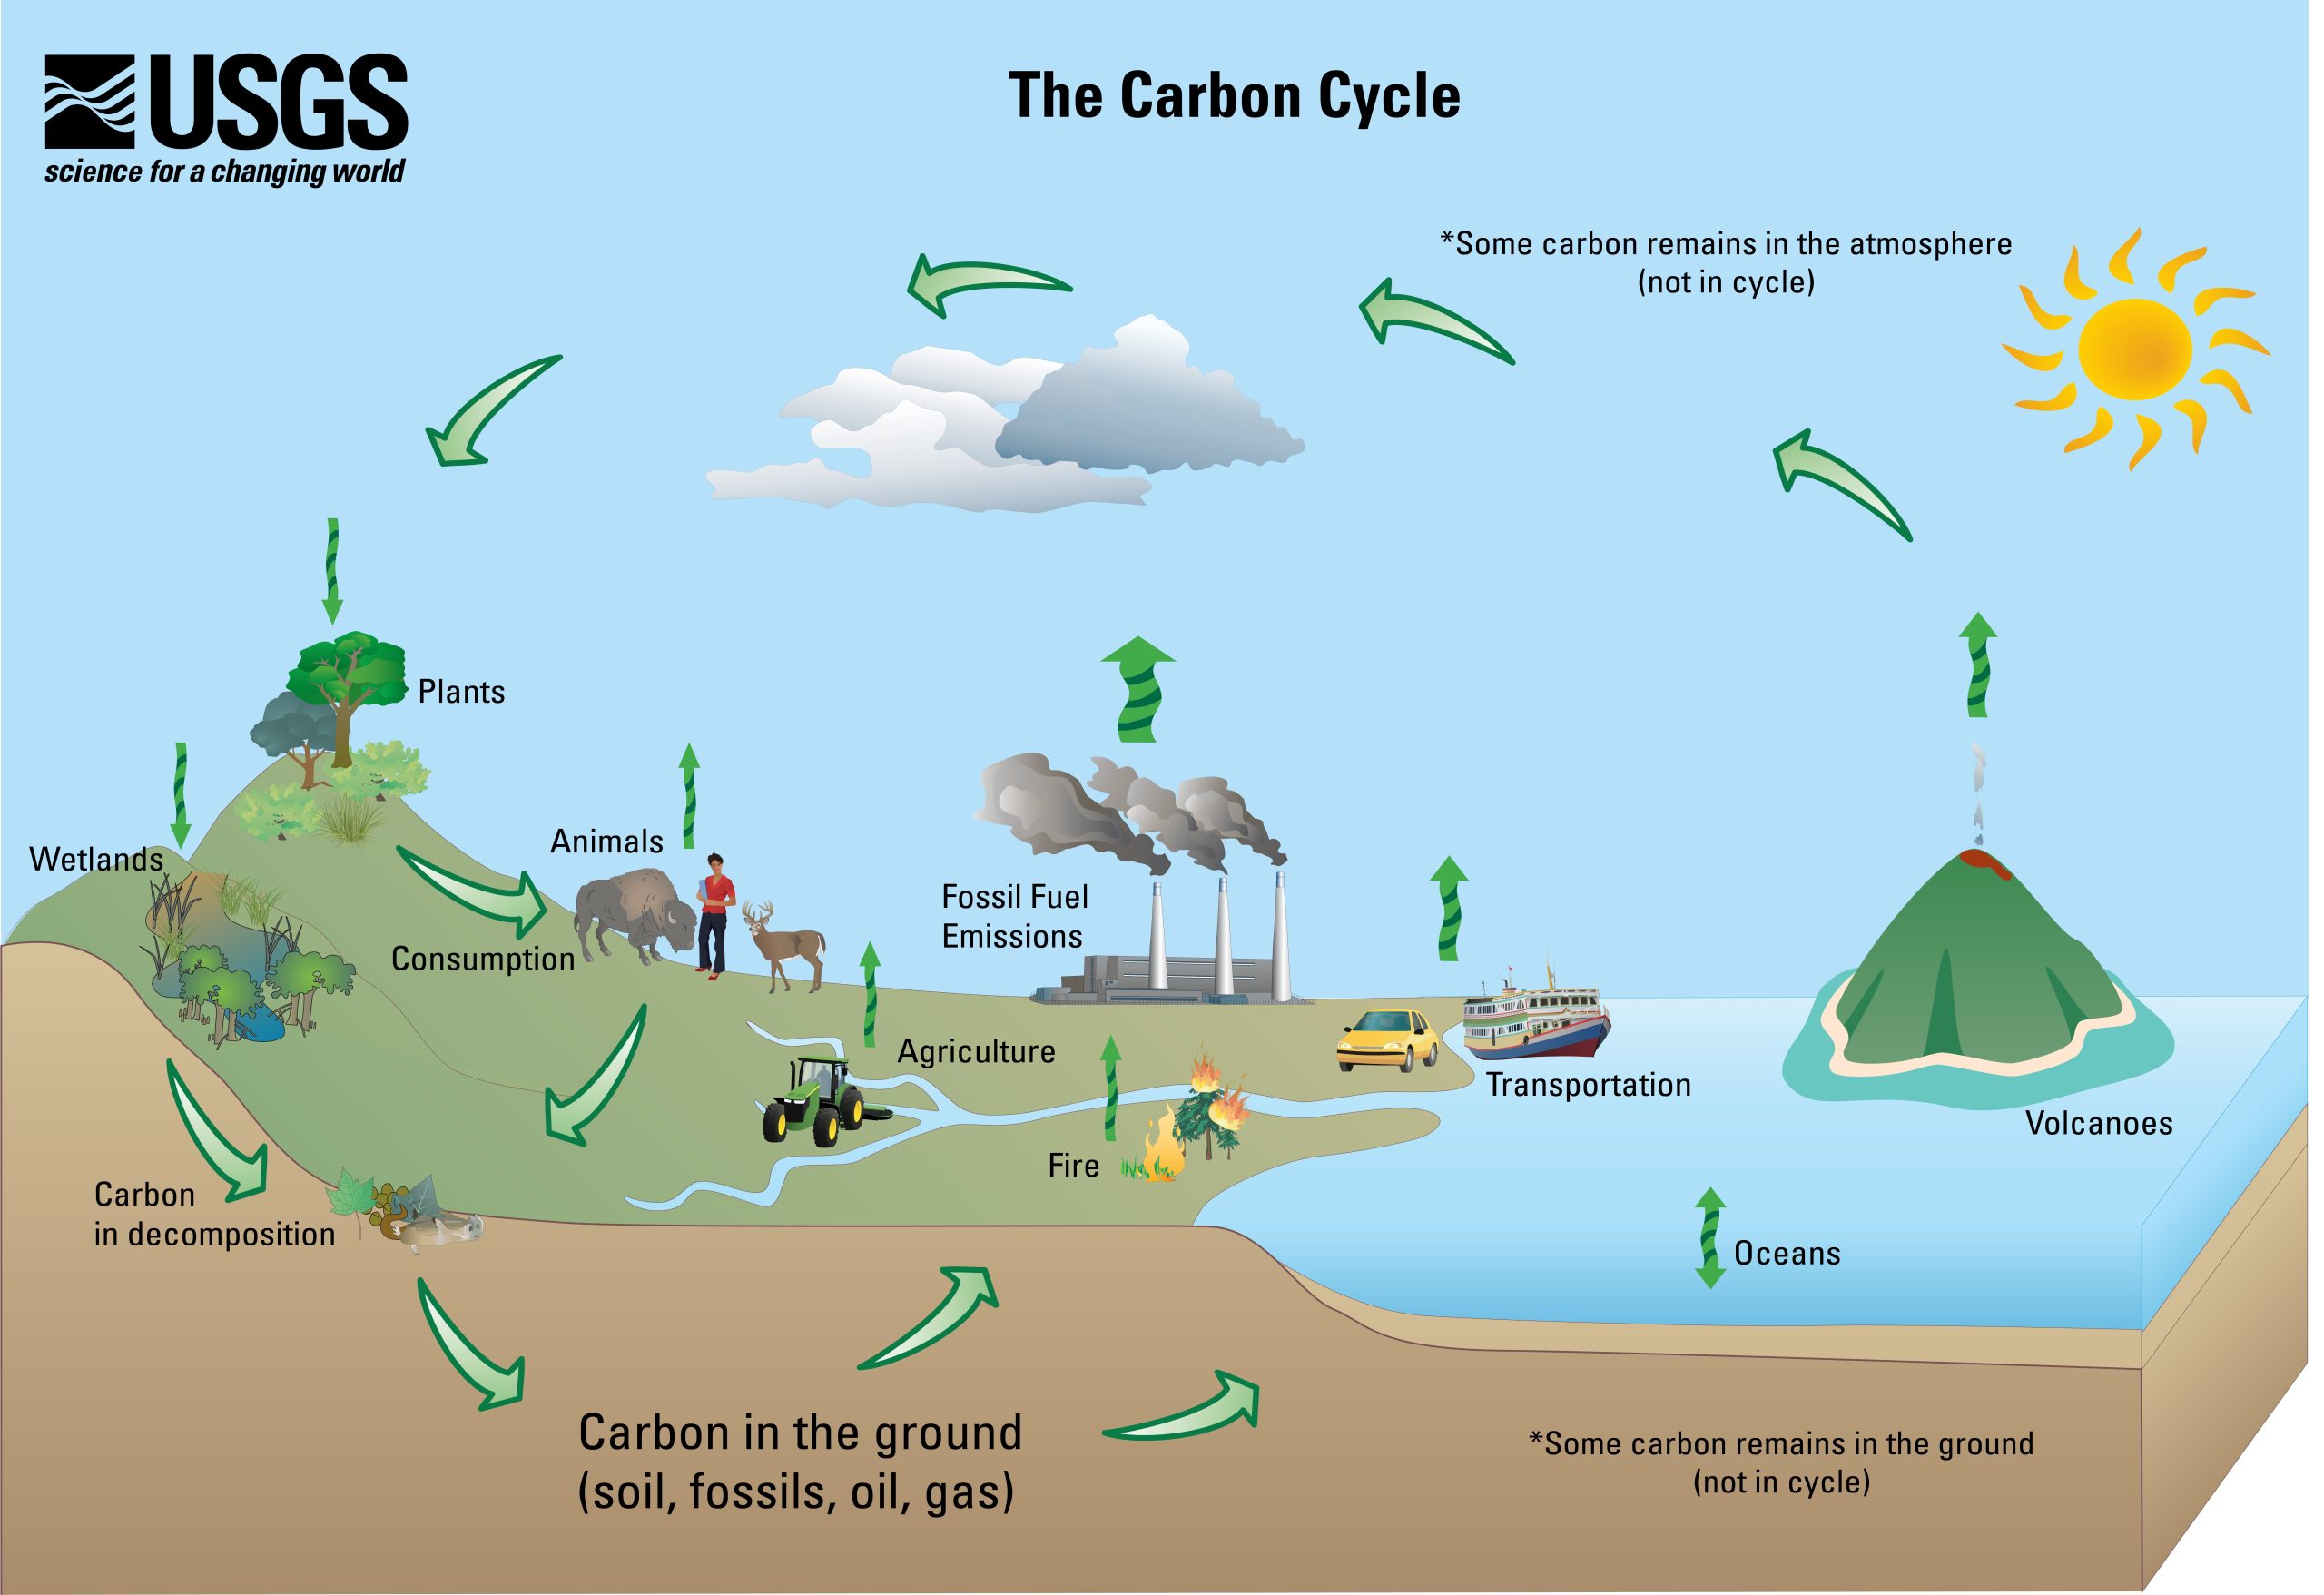 Figure shows how carbon moves between reservoirs such as the ocean, atmosphere, biosphere, and geosphere.